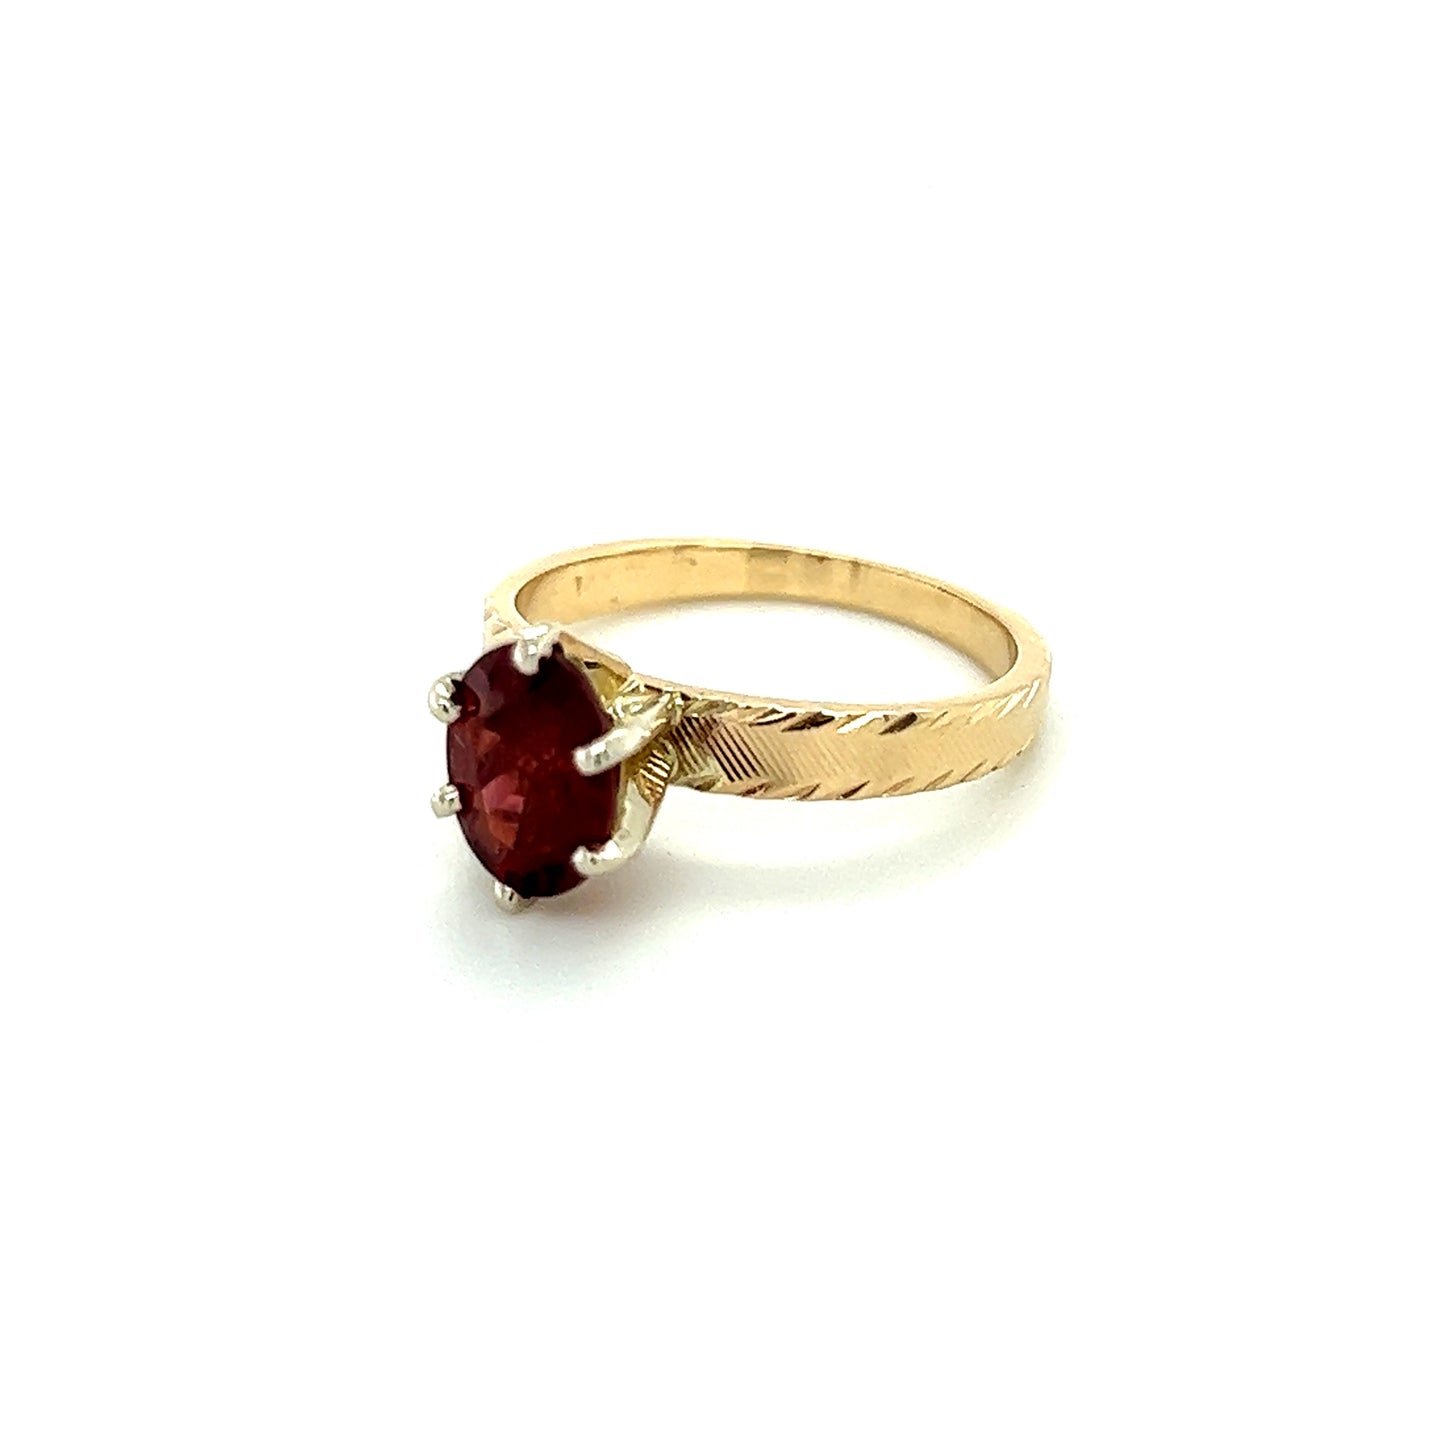 Lady's 14K Yellow Gold Ring 2.8g